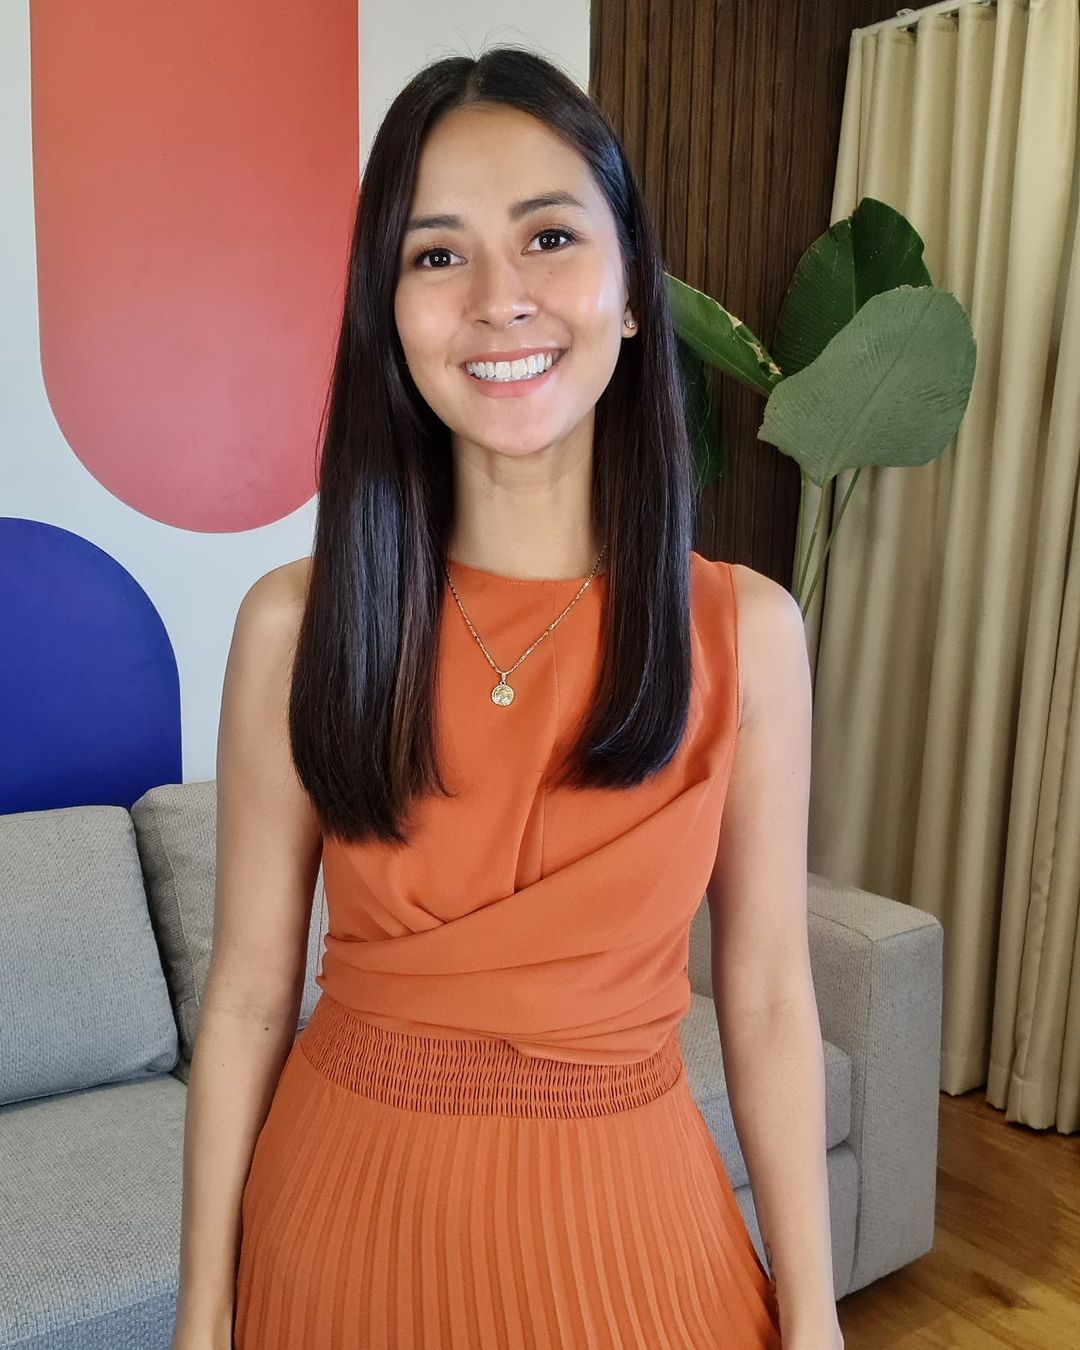 Bianca Gonzalez shared her thoughts on celebrities accepting political endorsements.